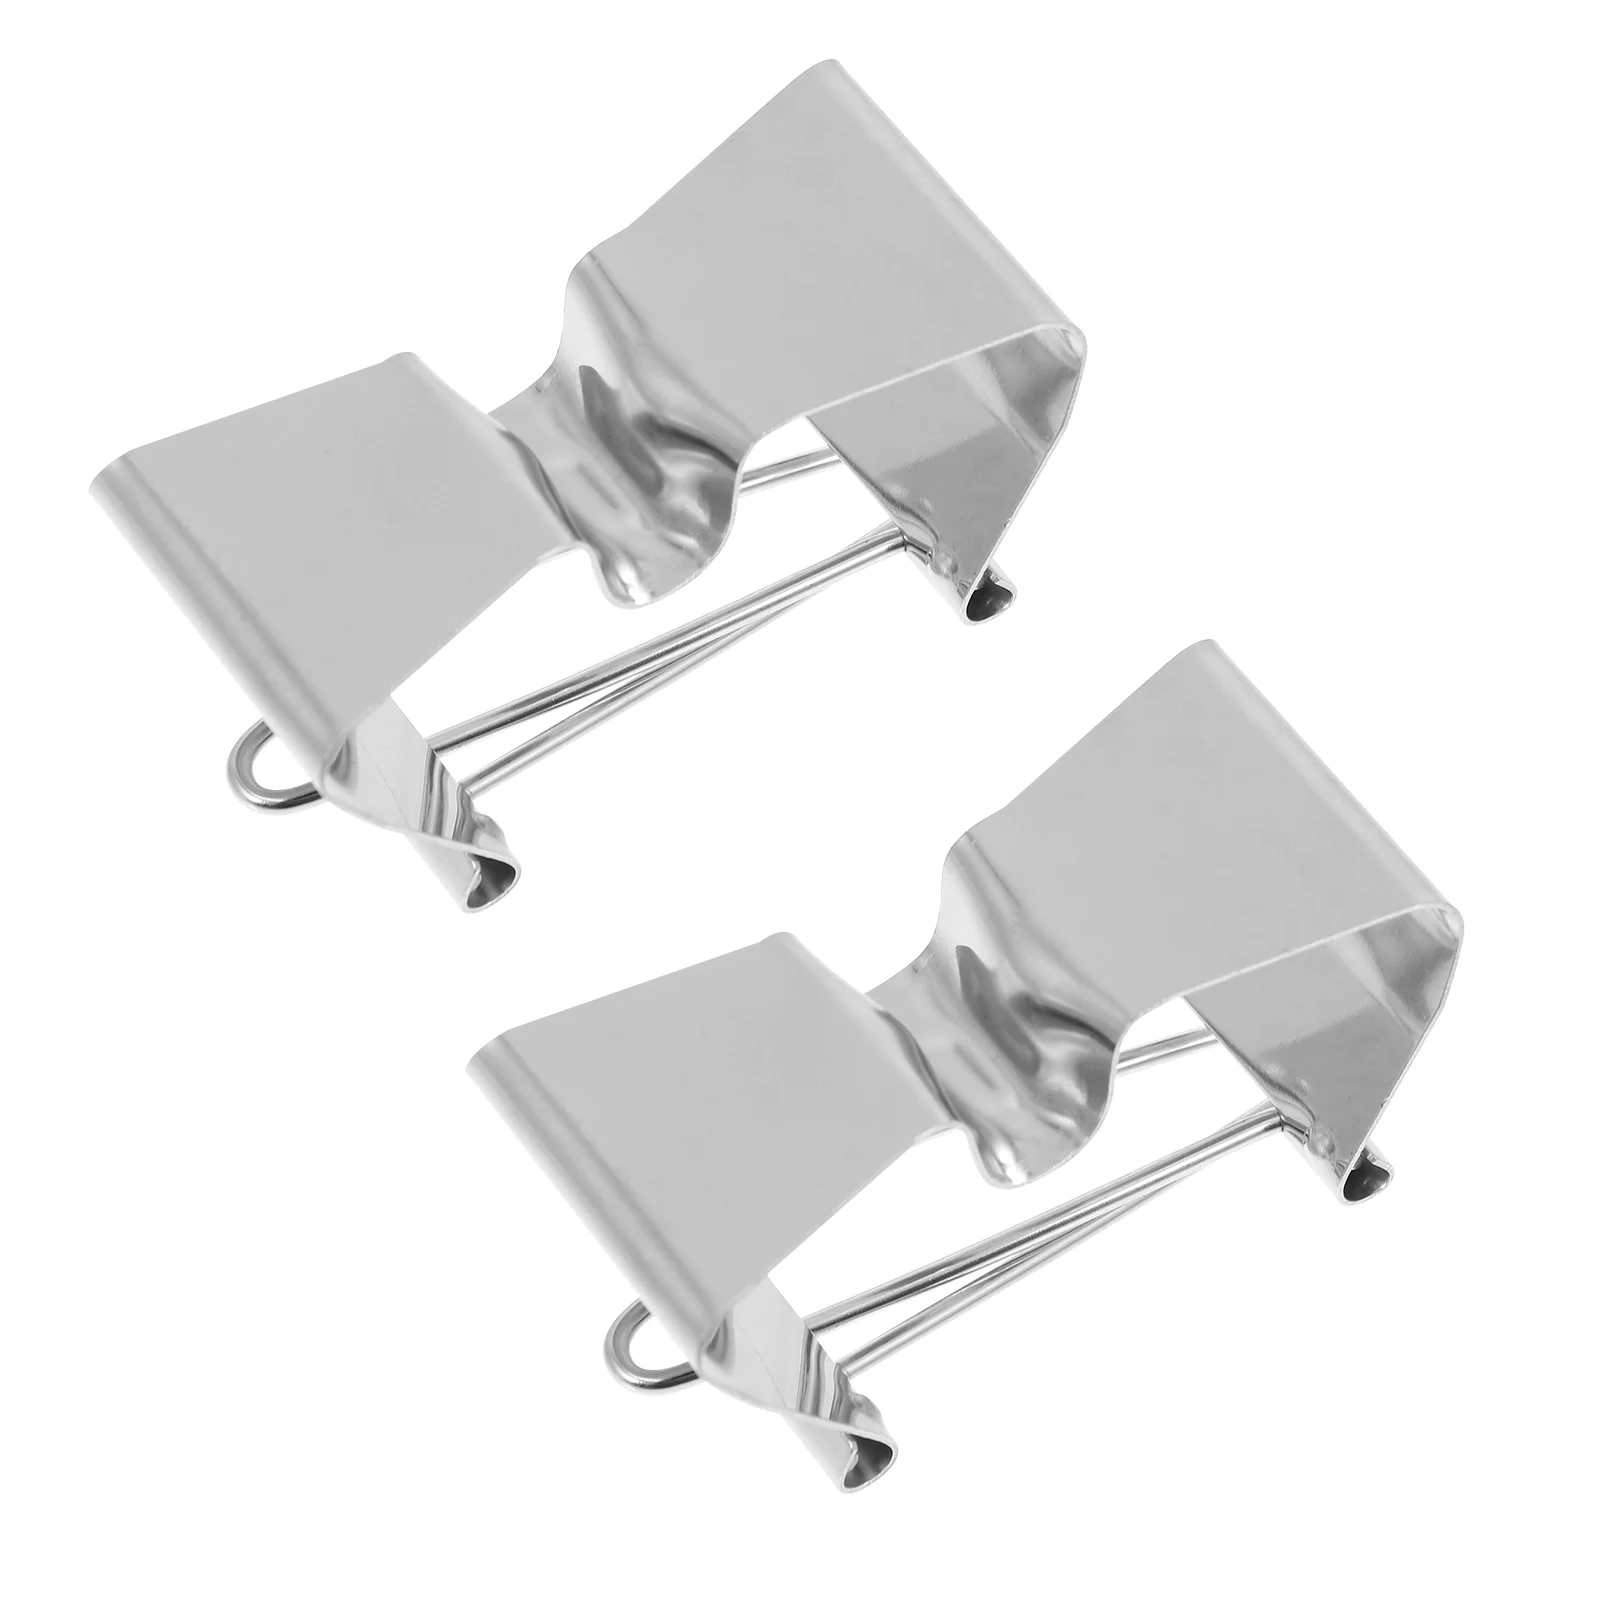 

2 Pcs Canvas Clip Metal Frame Stainless Steel Holder Supplies Painting Clips Wet Dry Clamps Artist Gift Carrier